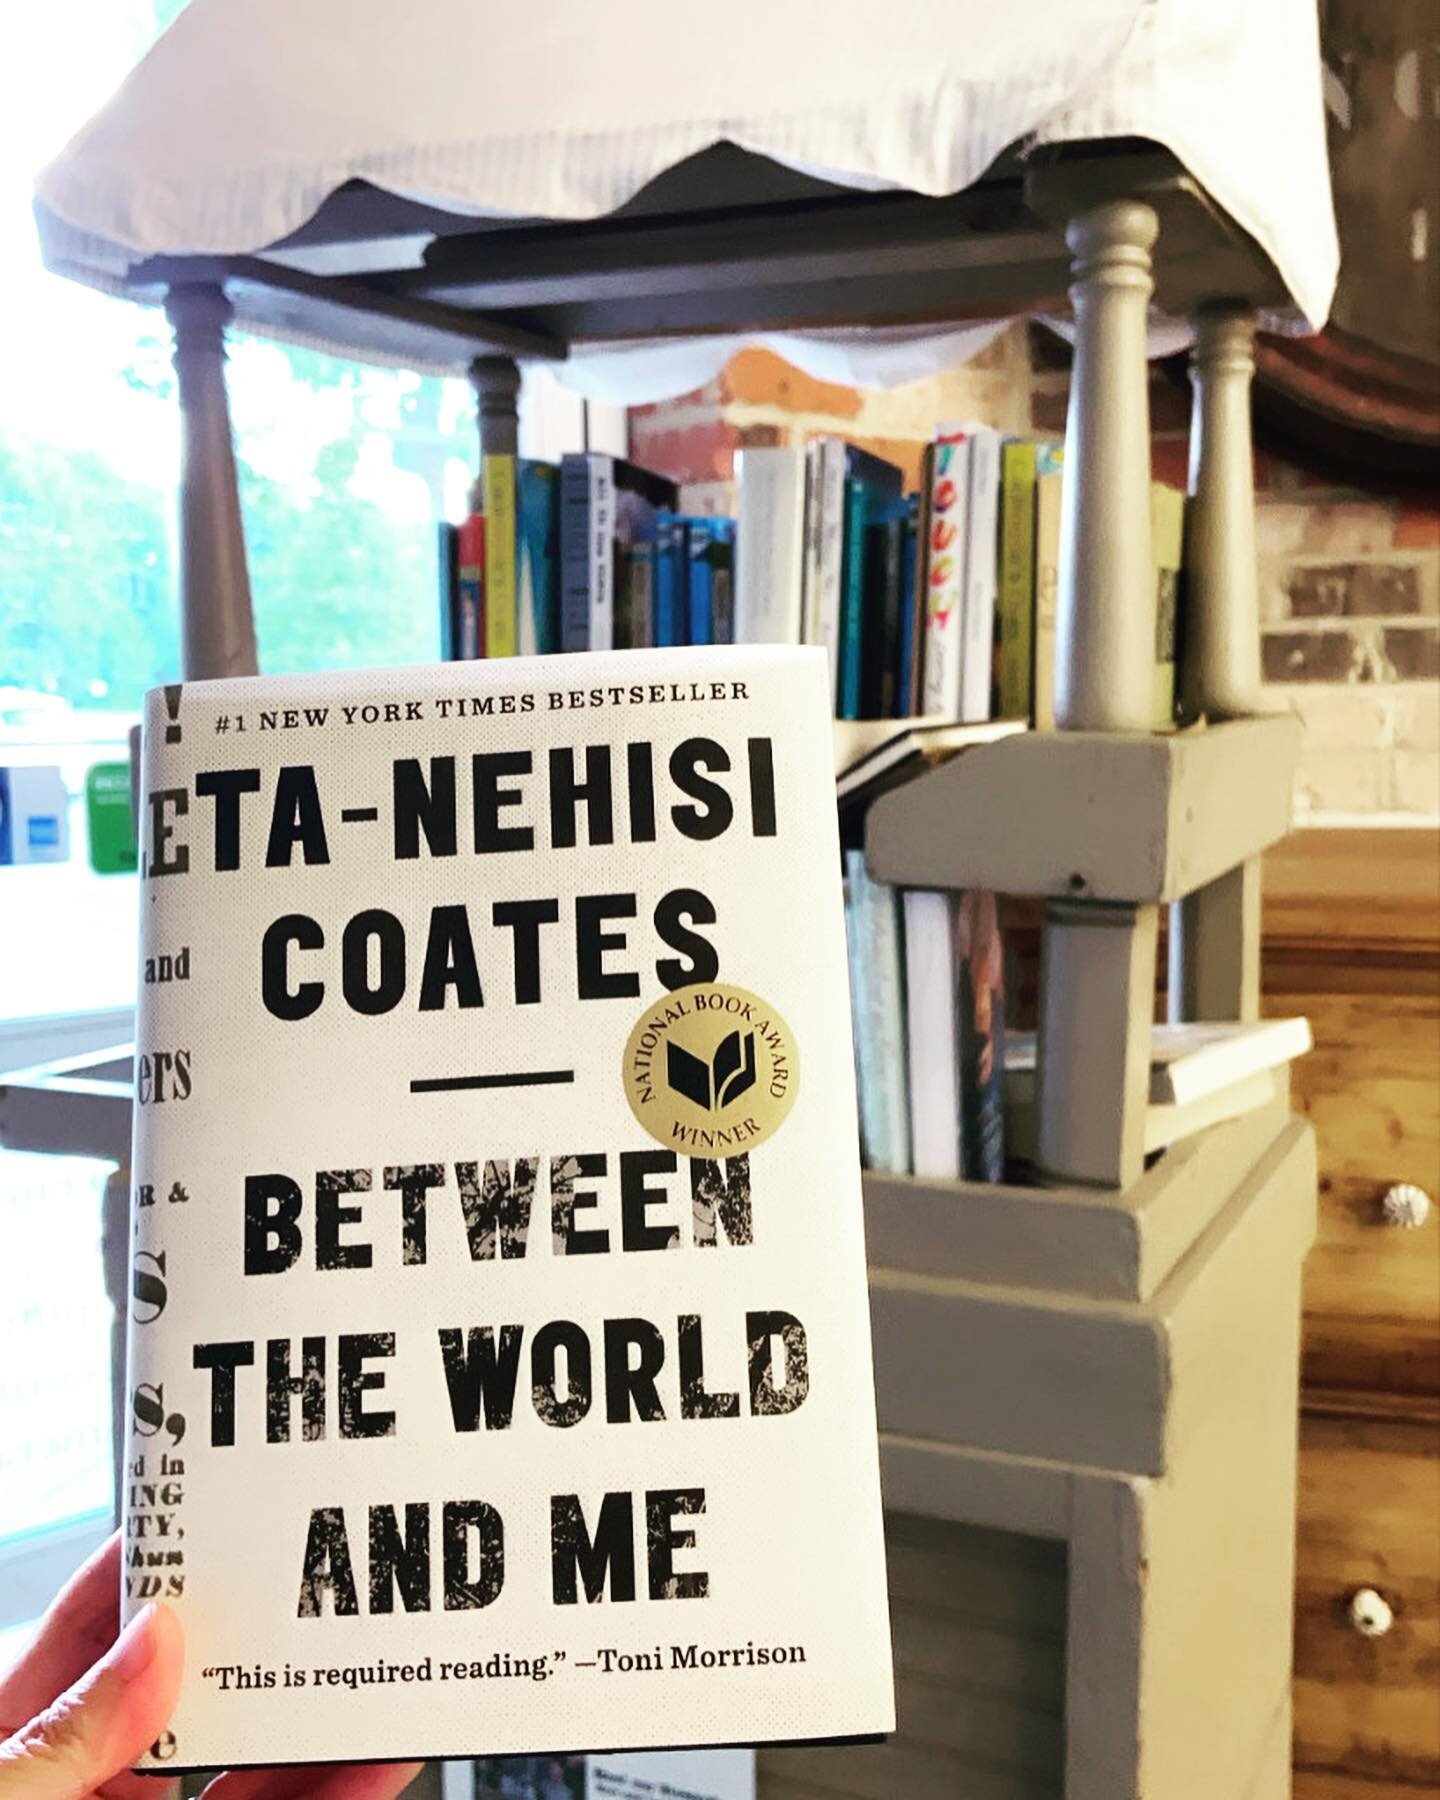 It&rsquo;s #fridaydropoff time!! 

We found a cute #littlefreelibrary in a large antique store and the owner was happy we stopped by! 

* if you haven&rsquo;t, please go get  @tanehisipcoates Between The World &amp; Me from your fave indie bookstore.